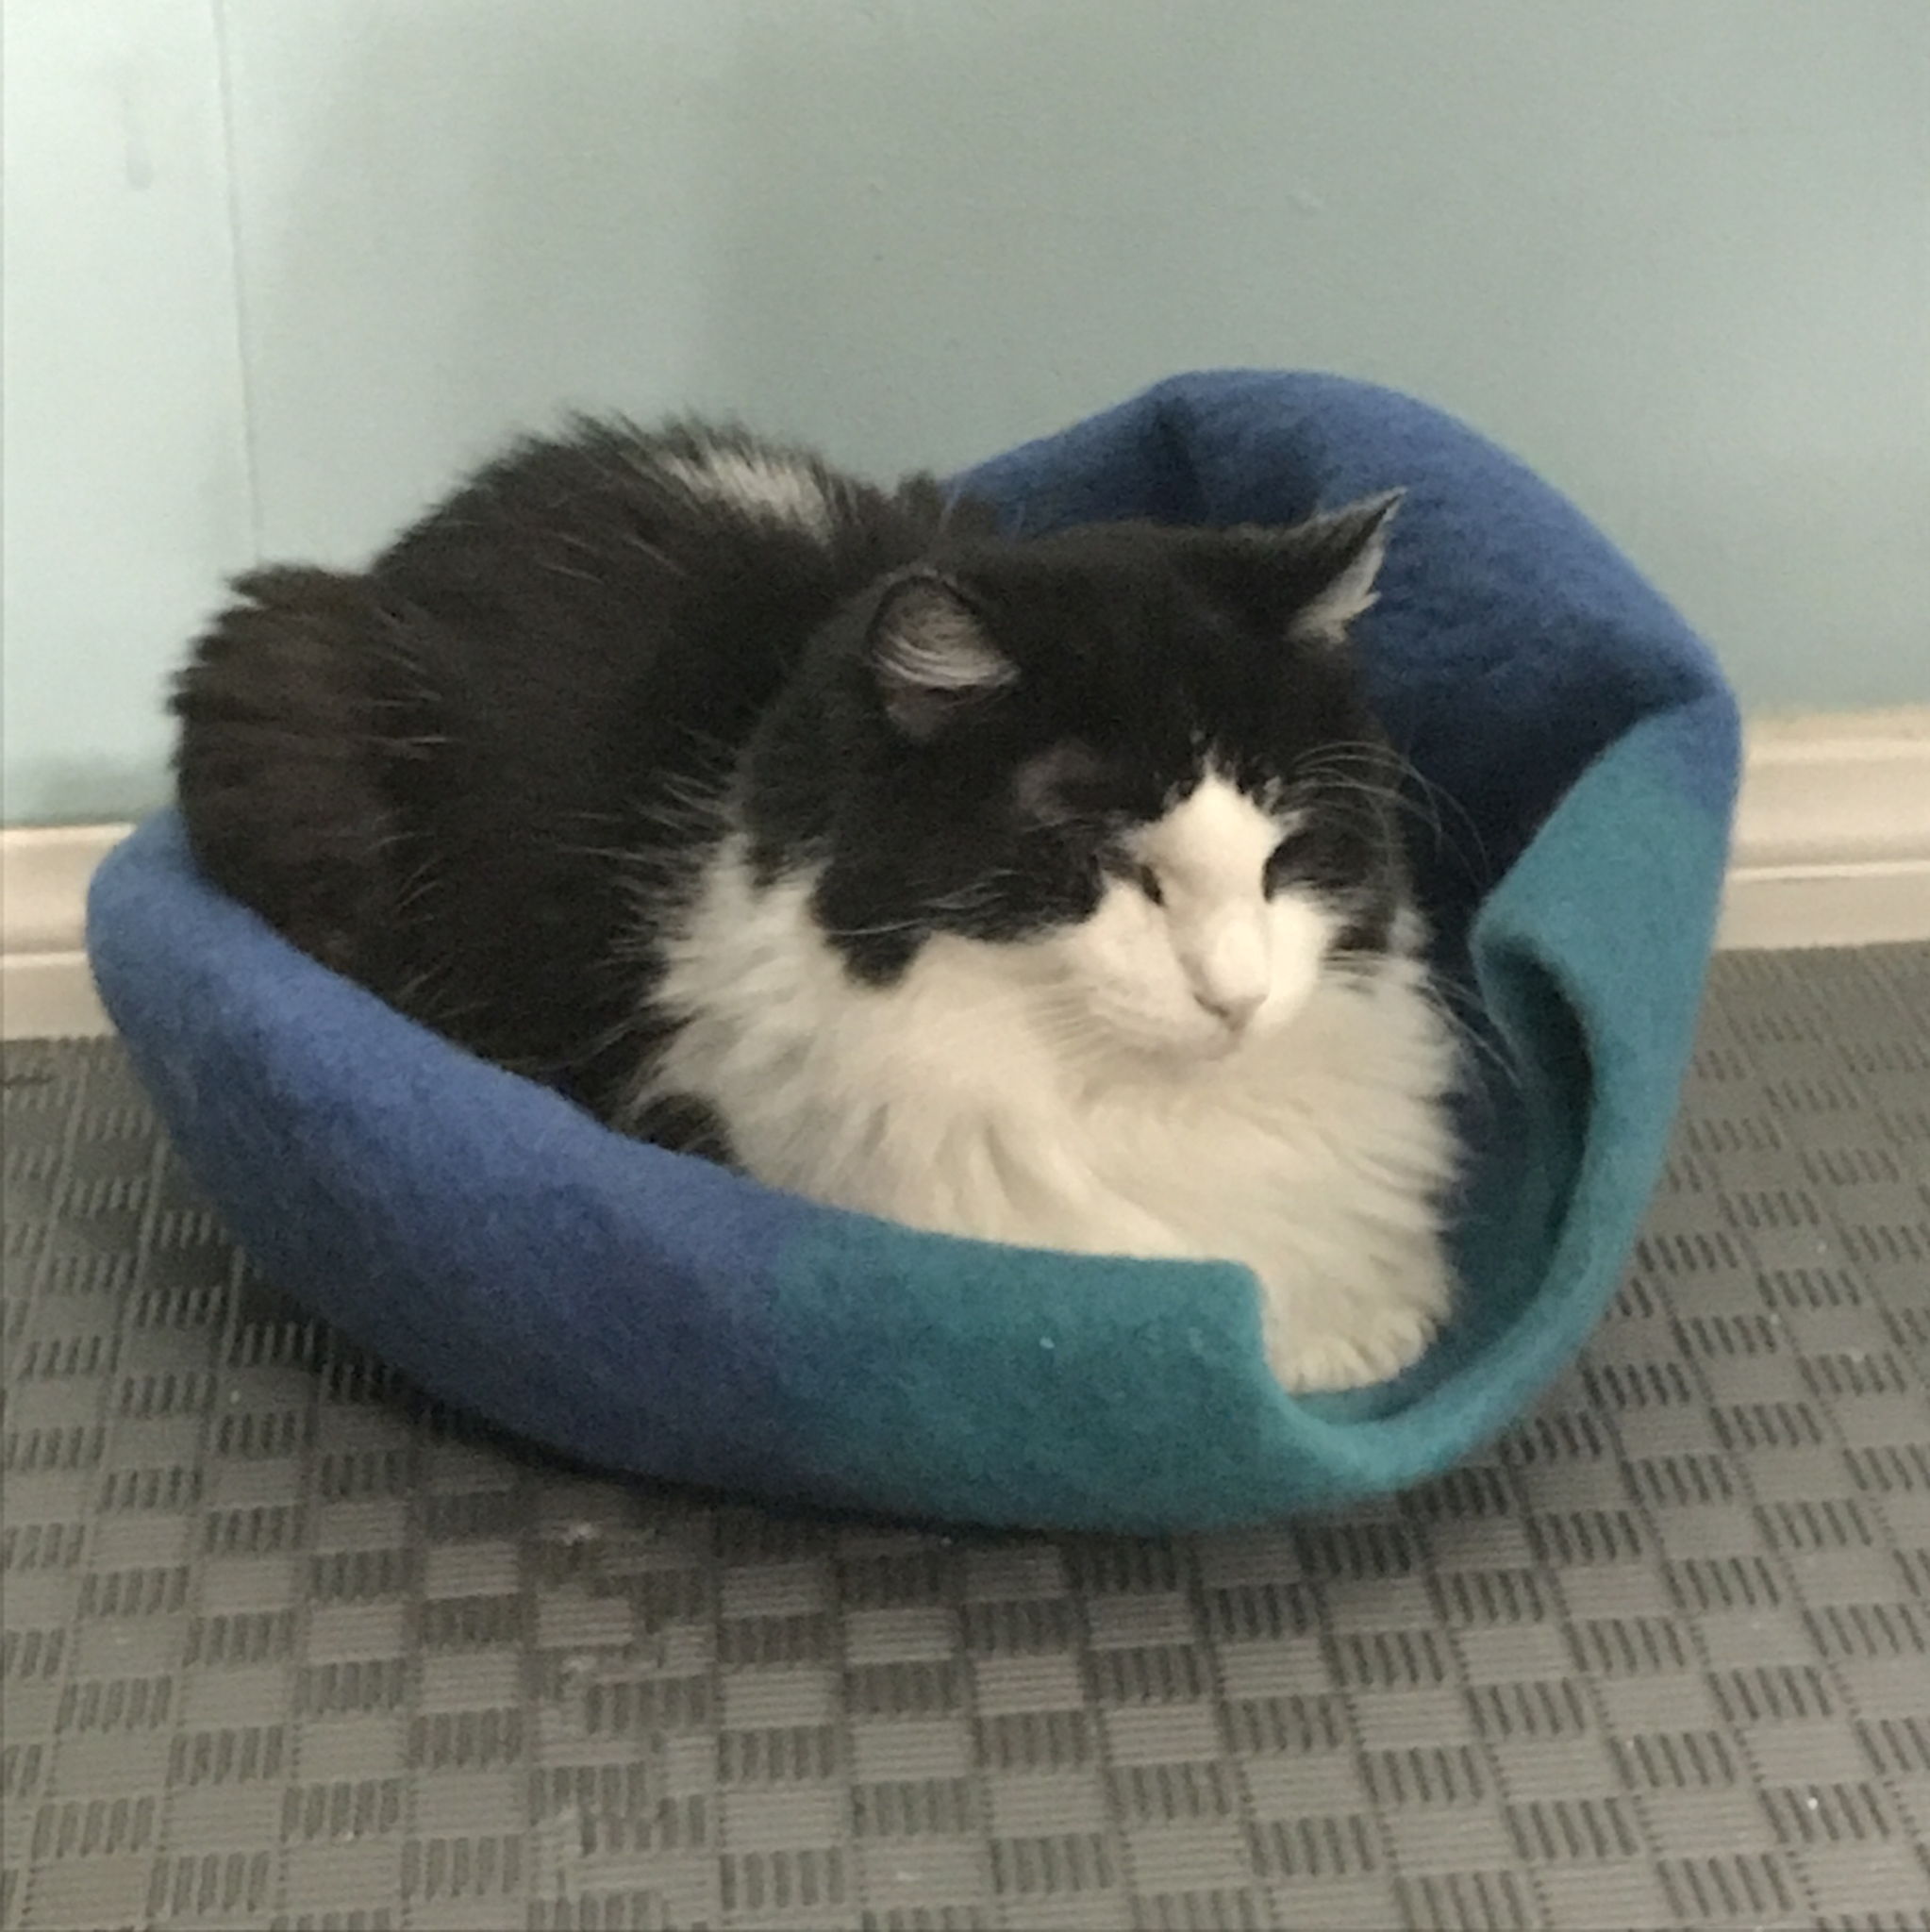 A cat sitting comfortably on a cat bed.